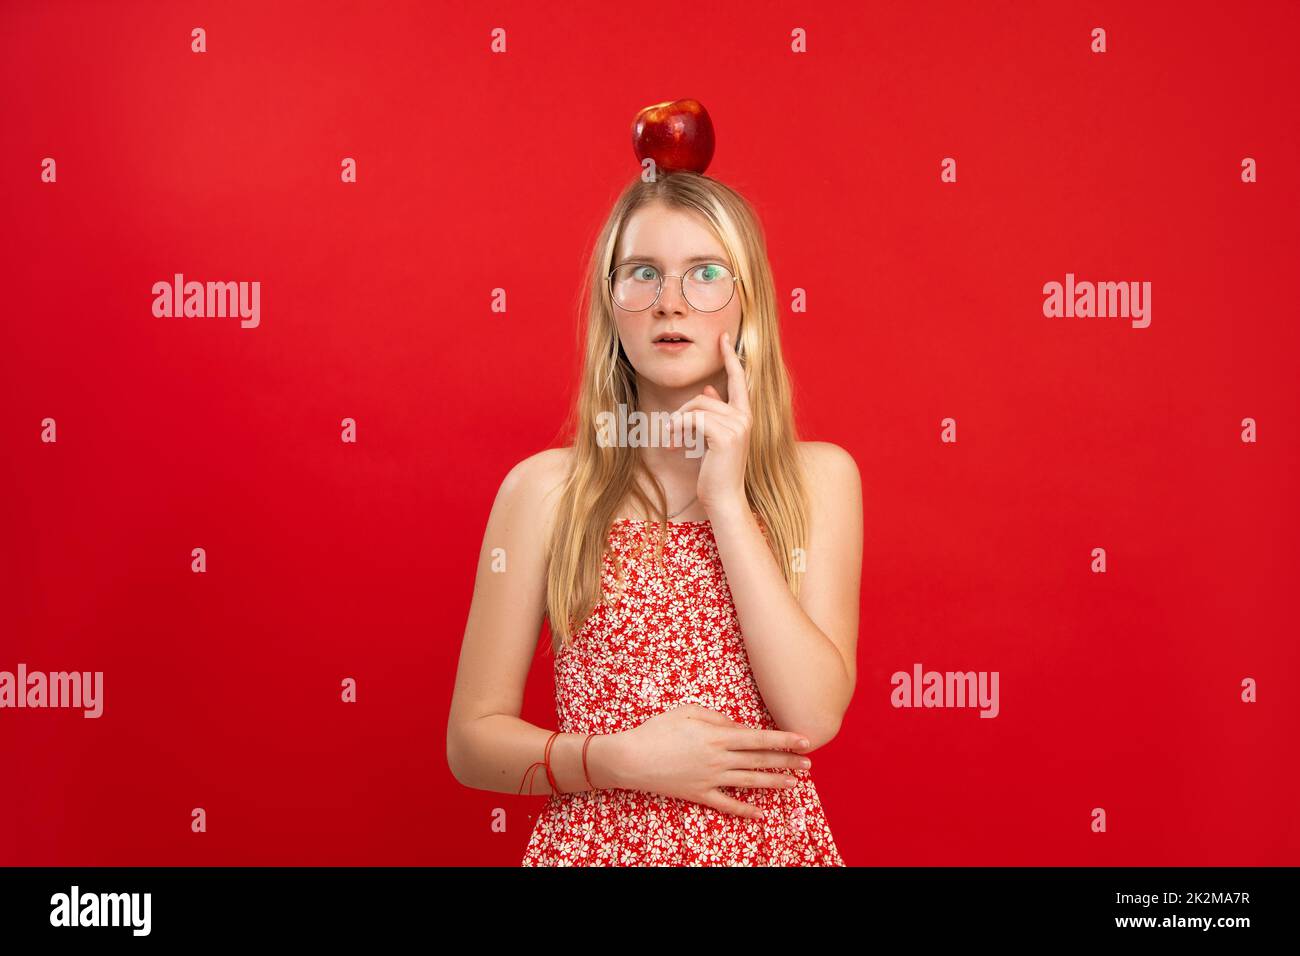 Portrait of puzzled teenage girl with fair hair, big red apple on head wearing glasses touching cheek with index finger. Stock Photo